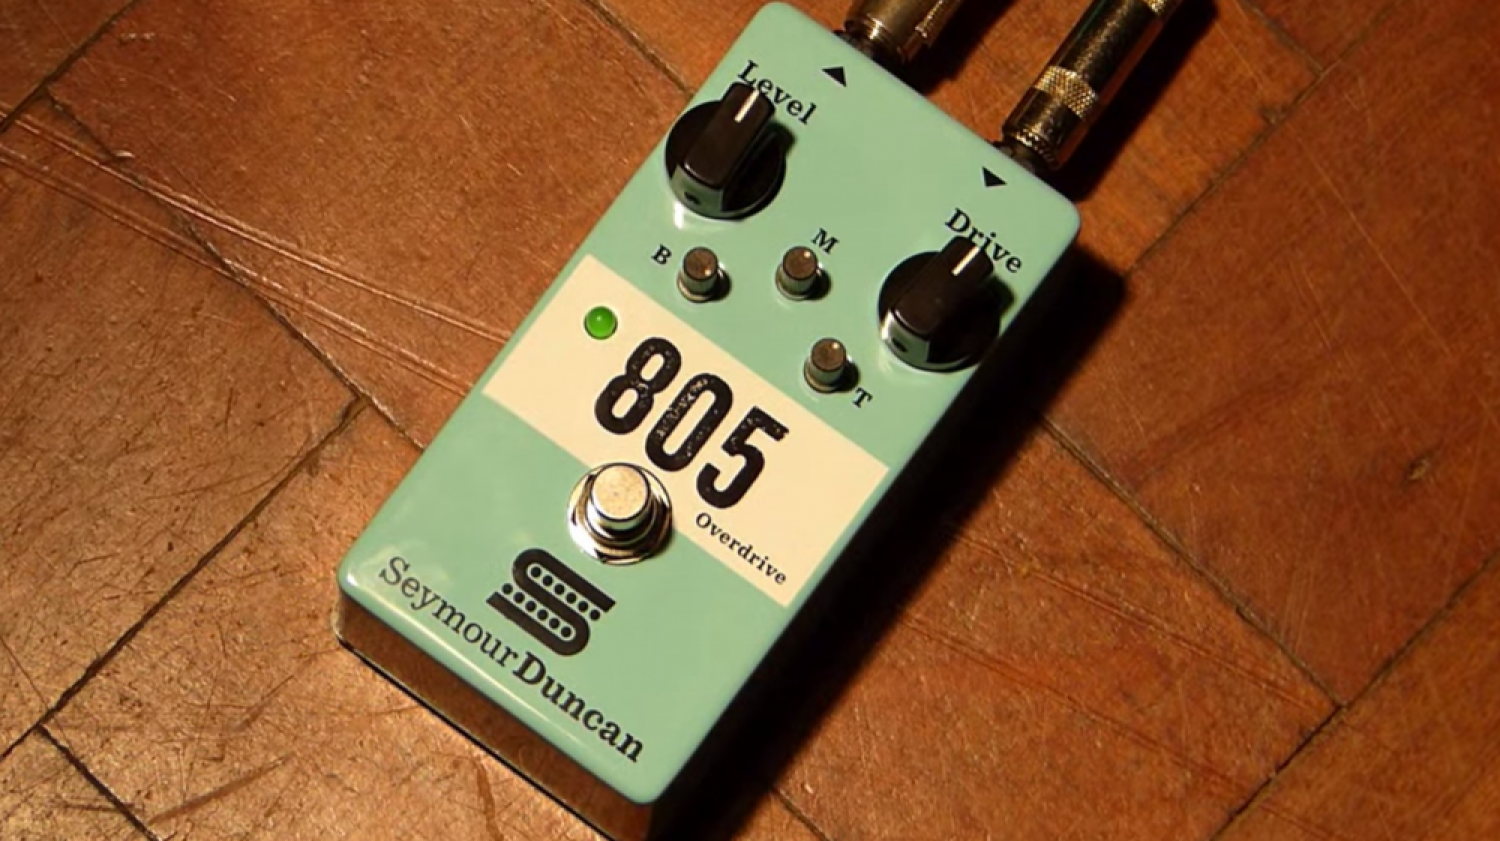 Seymour Duncan releases the 805 overdrive pedal